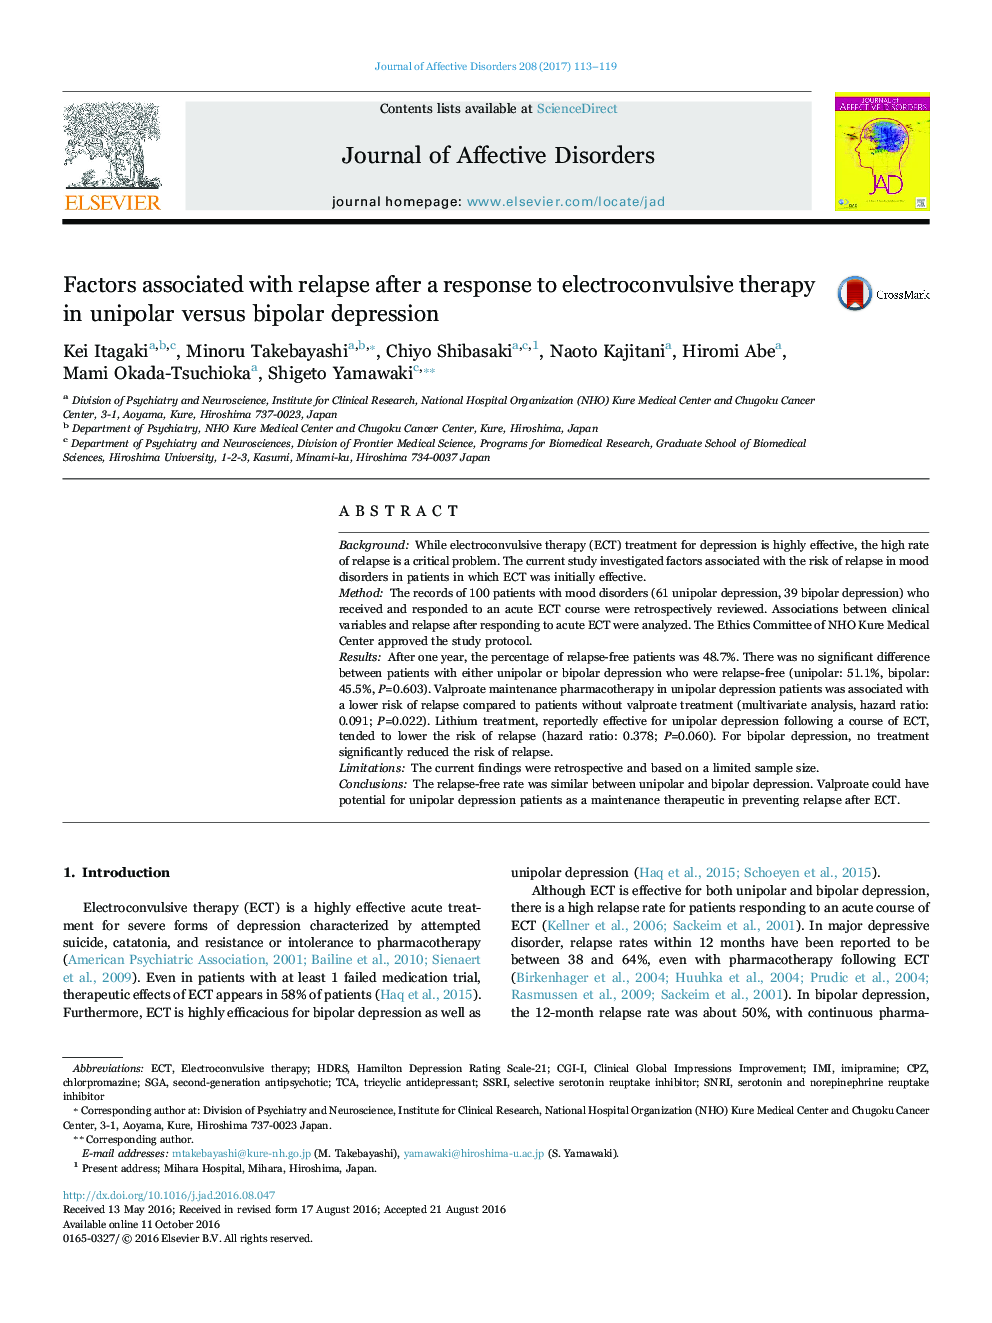 Factors associated with relapse after a response to electroconvulsive therapy in unipolar versus bipolar depression